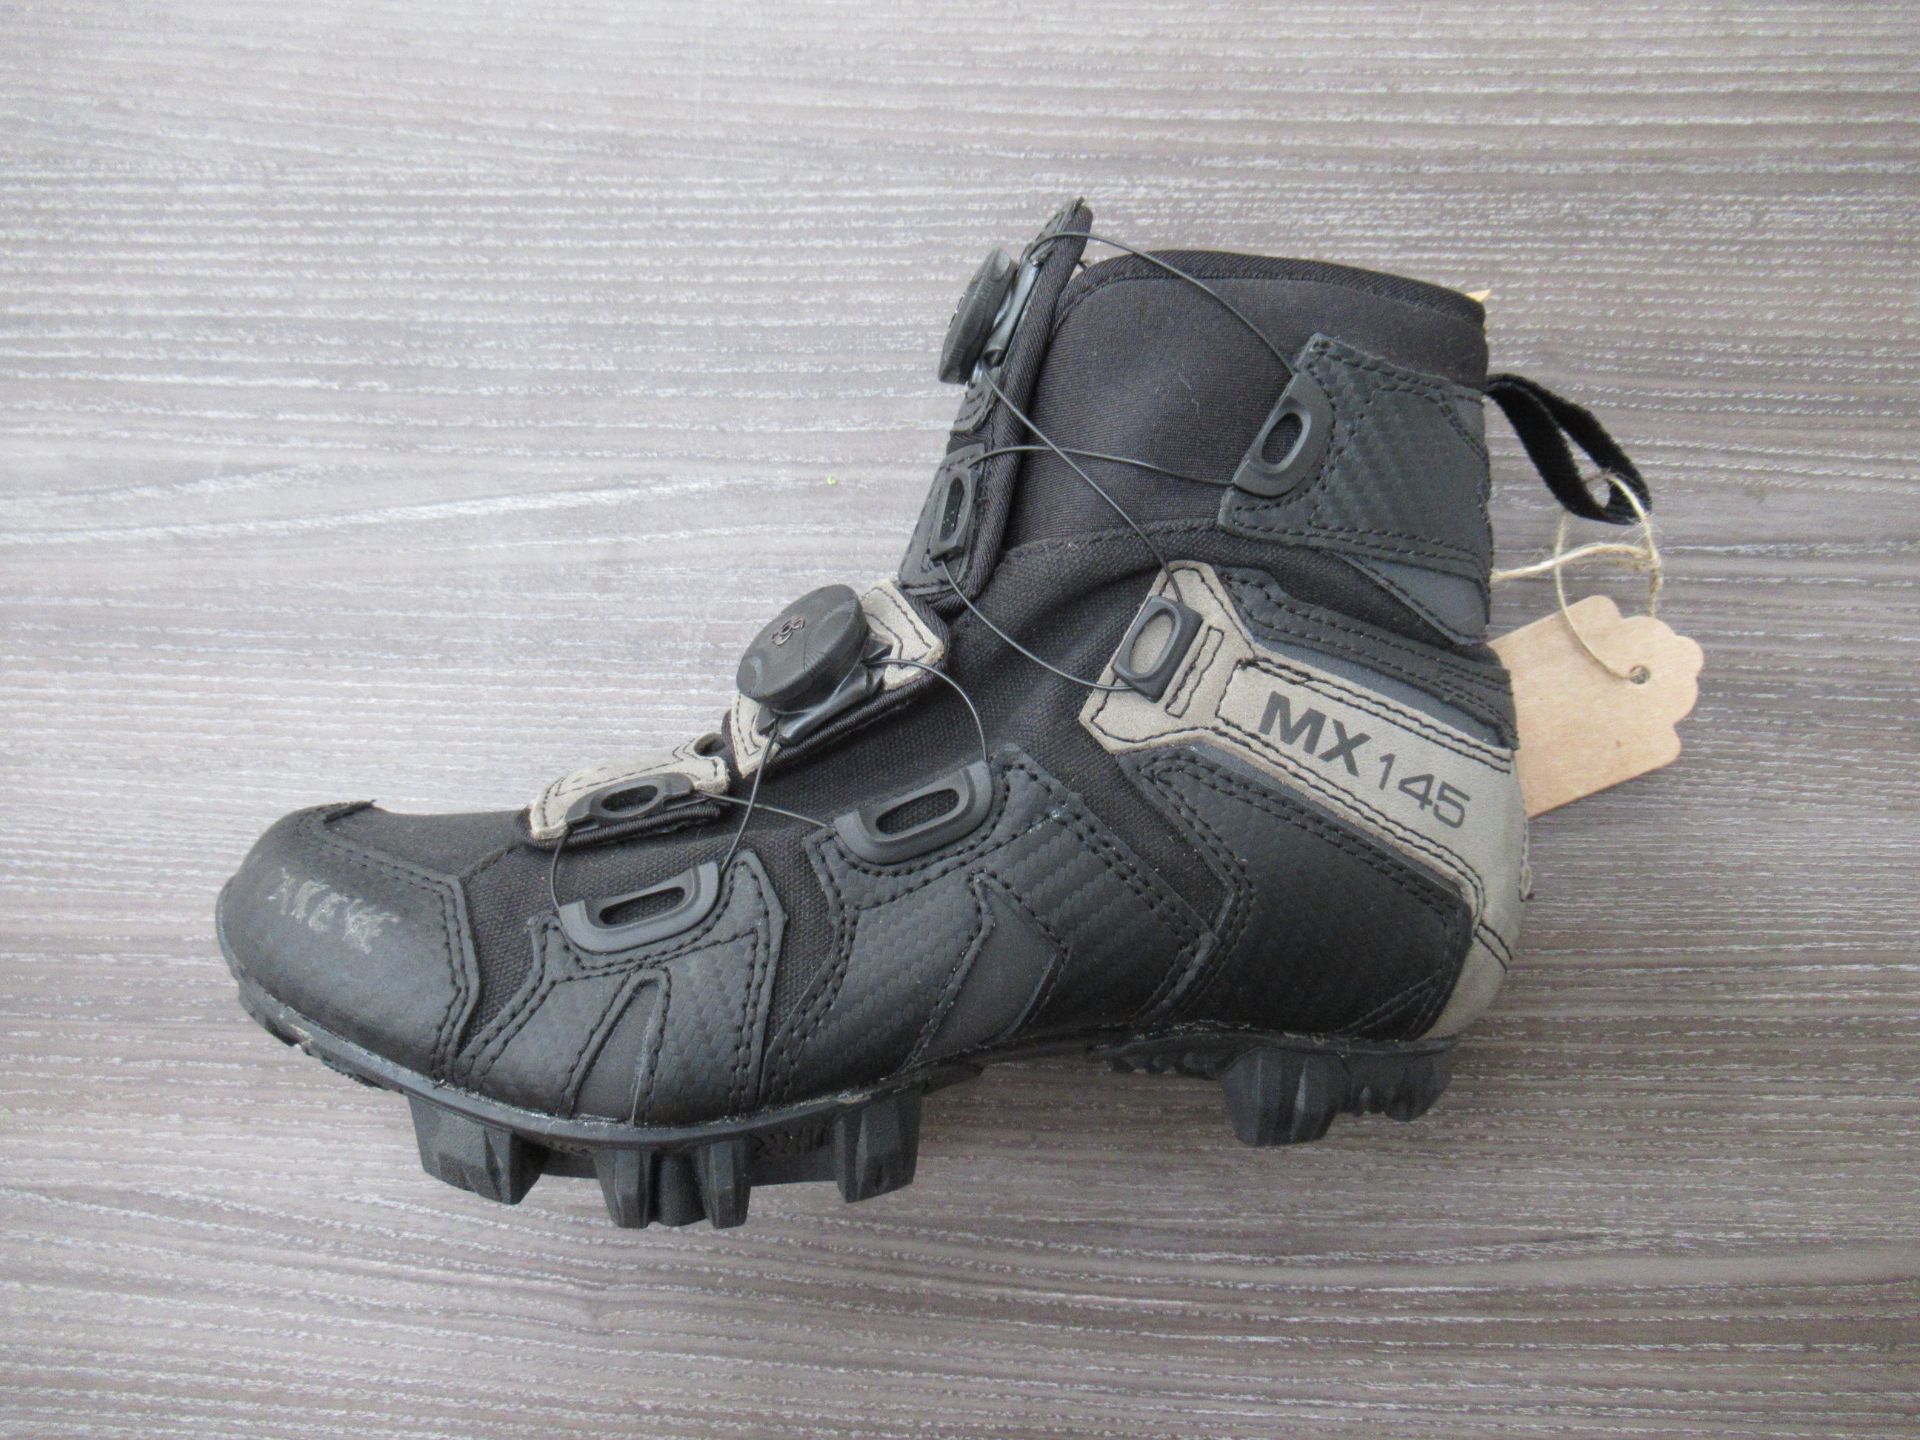 Pair of Lake MX145-W cycling boots (black/grey) - boxed EU size 38 (RRP£189.99) - Image 2 of 4